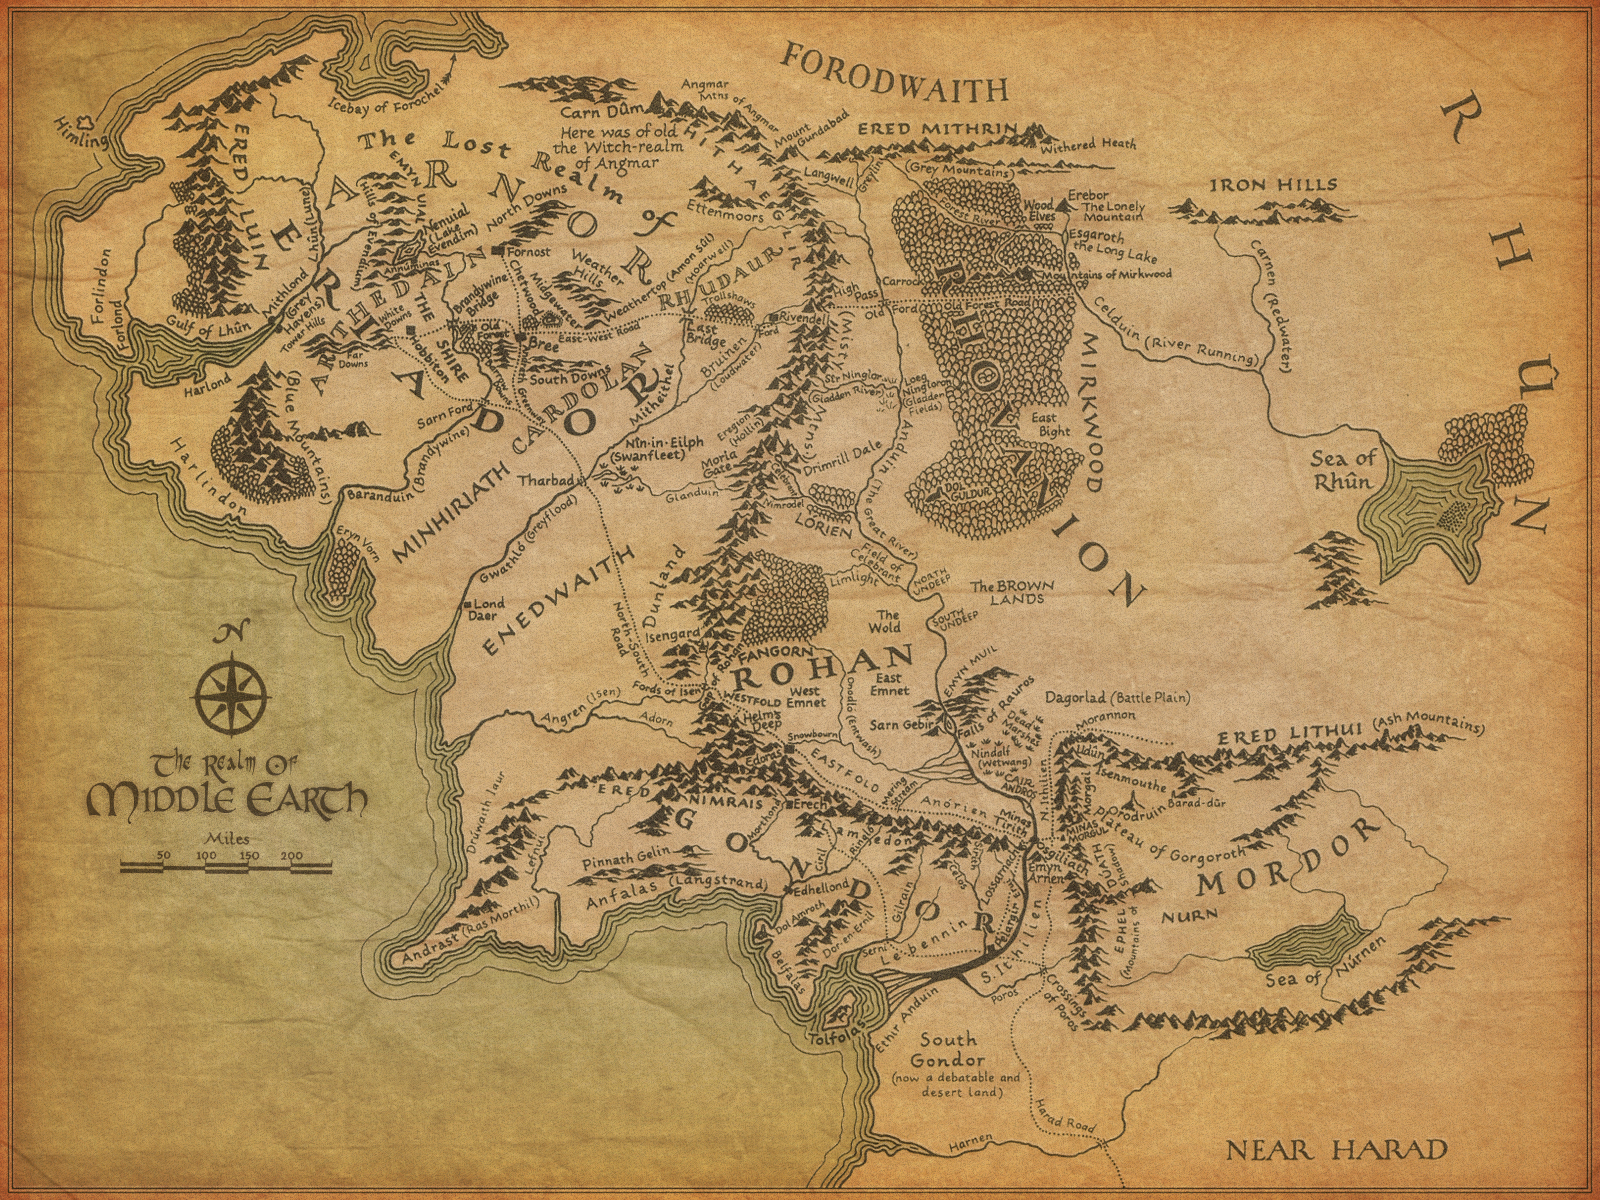 Maps. Harry Potter doesn't have 'em. Nuff said. 5. Epic fantasy poetry